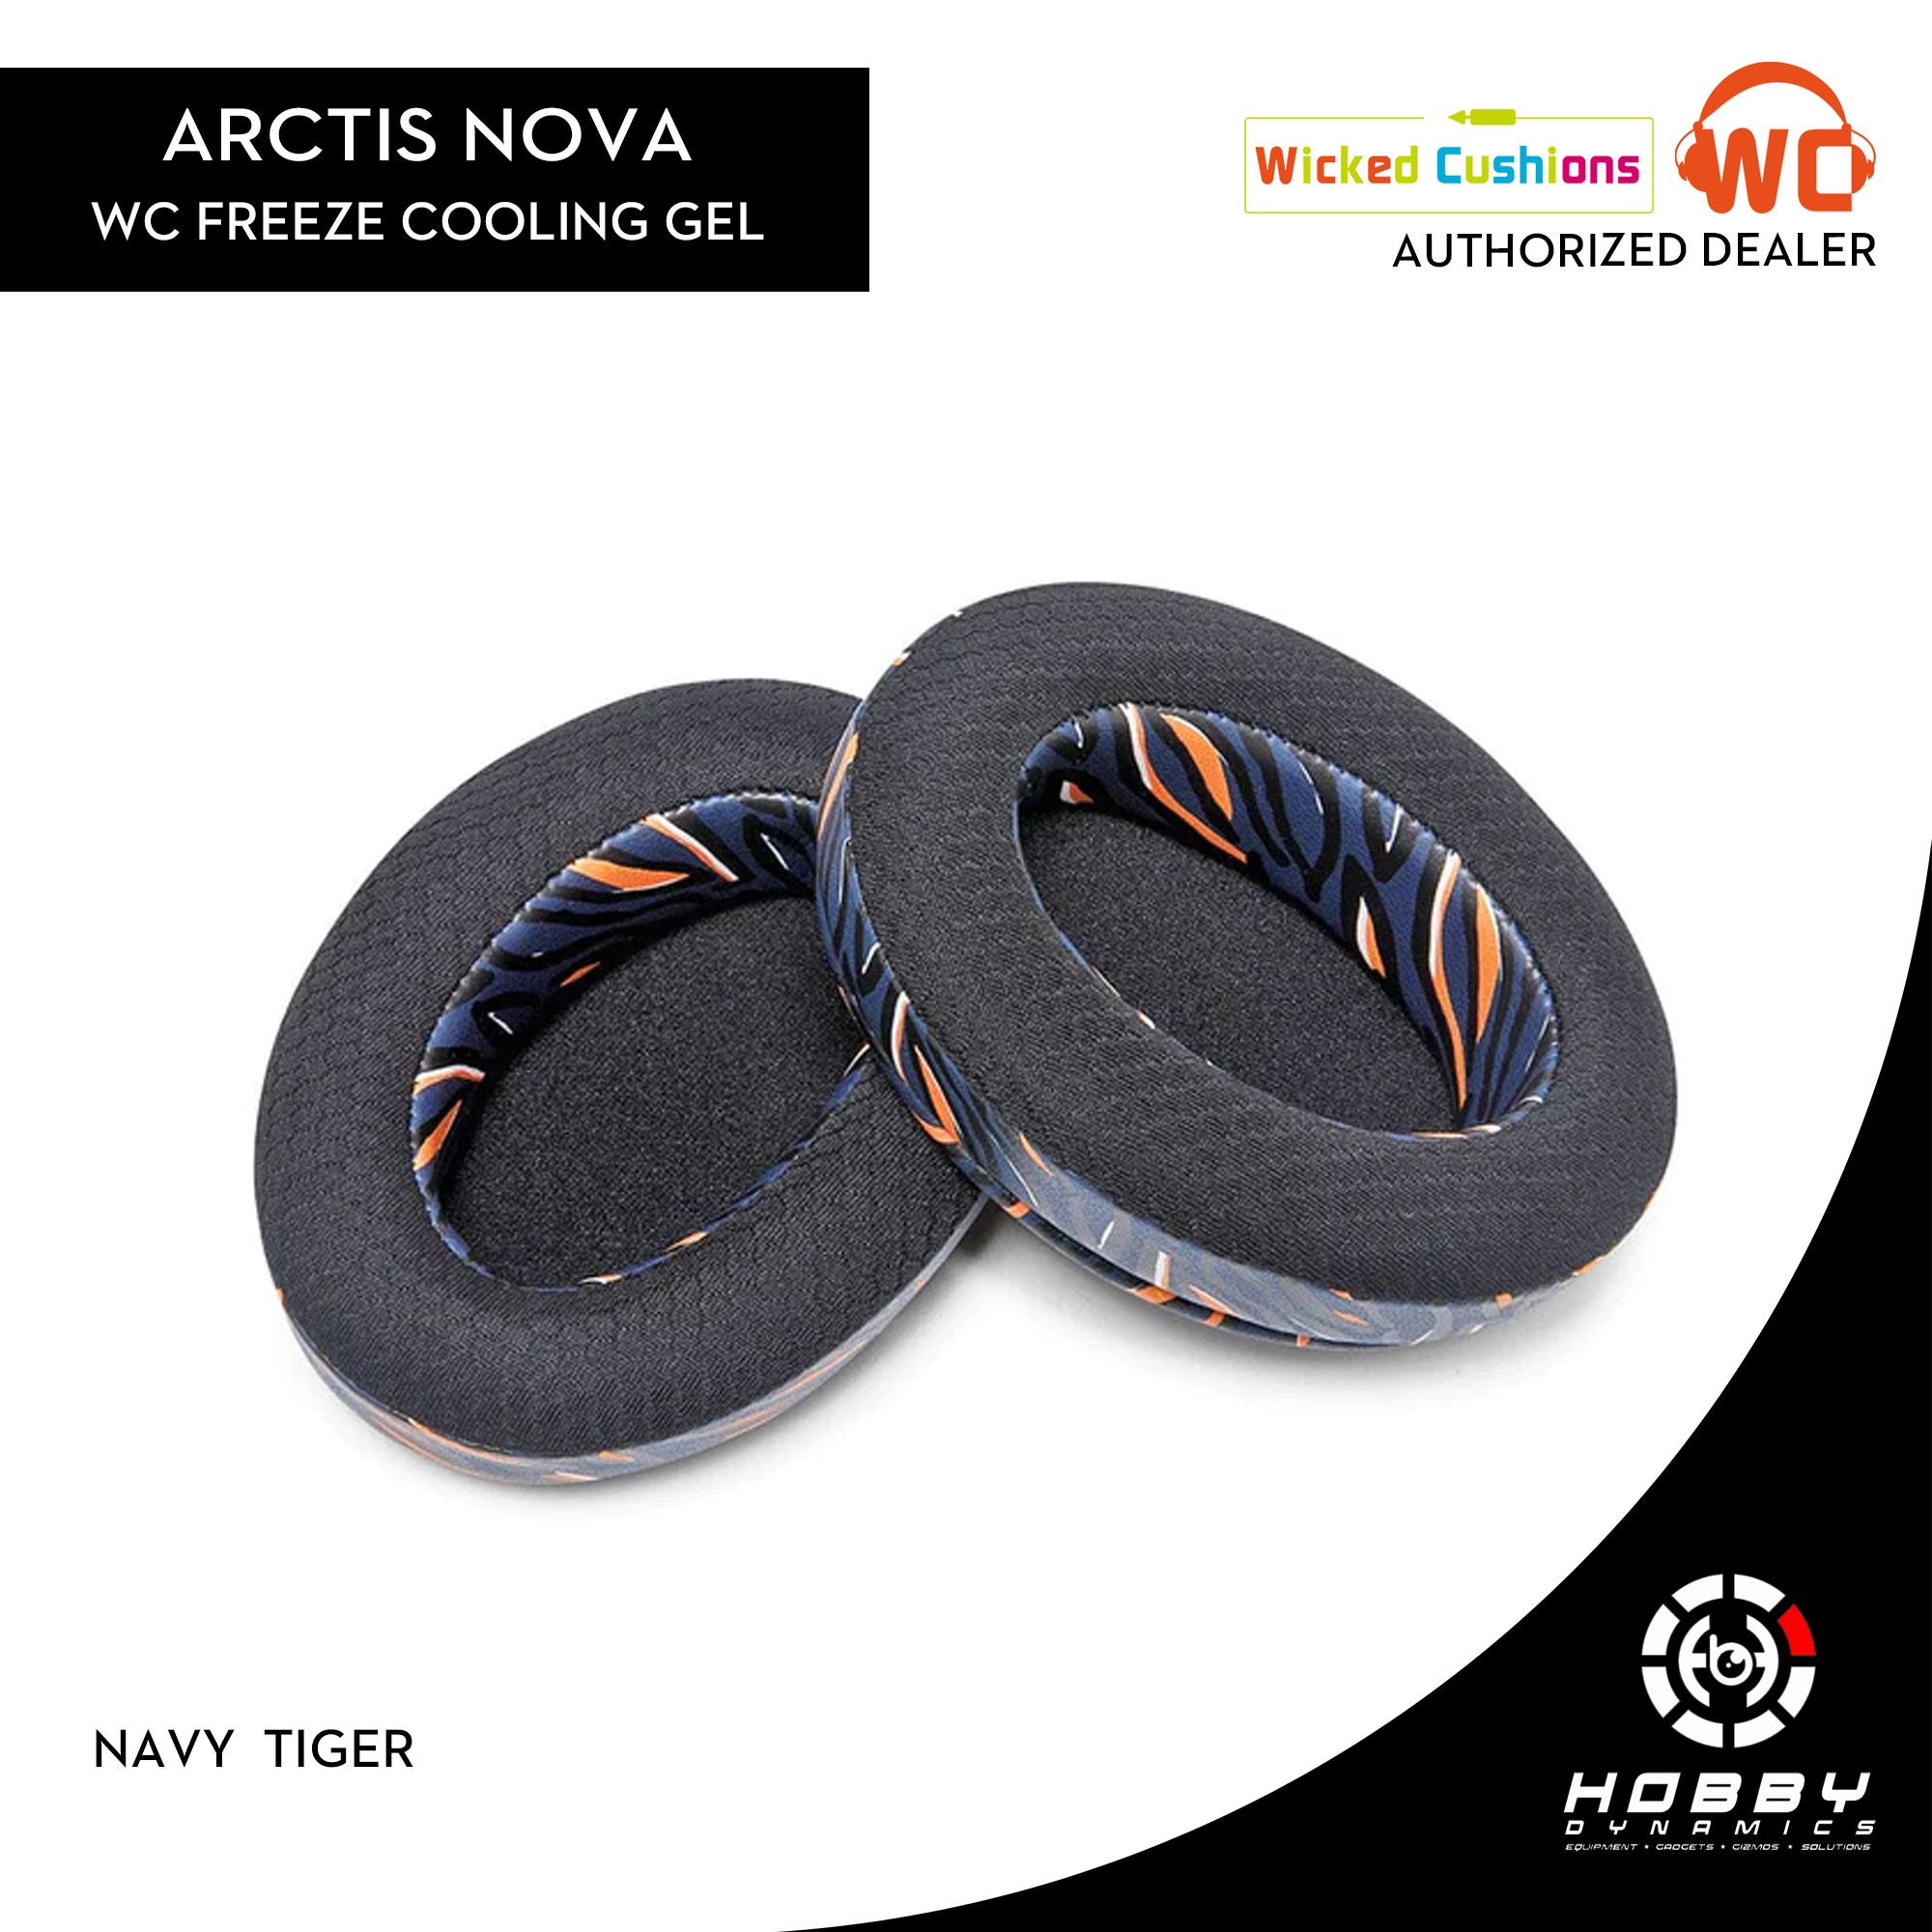 WC Freeze Nova Pro Wireless - Hybrid Fabric Cooling Gel Replacement Earpads  for Steelseries Arctis Nova Pro Wireless by Wicked Cushions, Improved